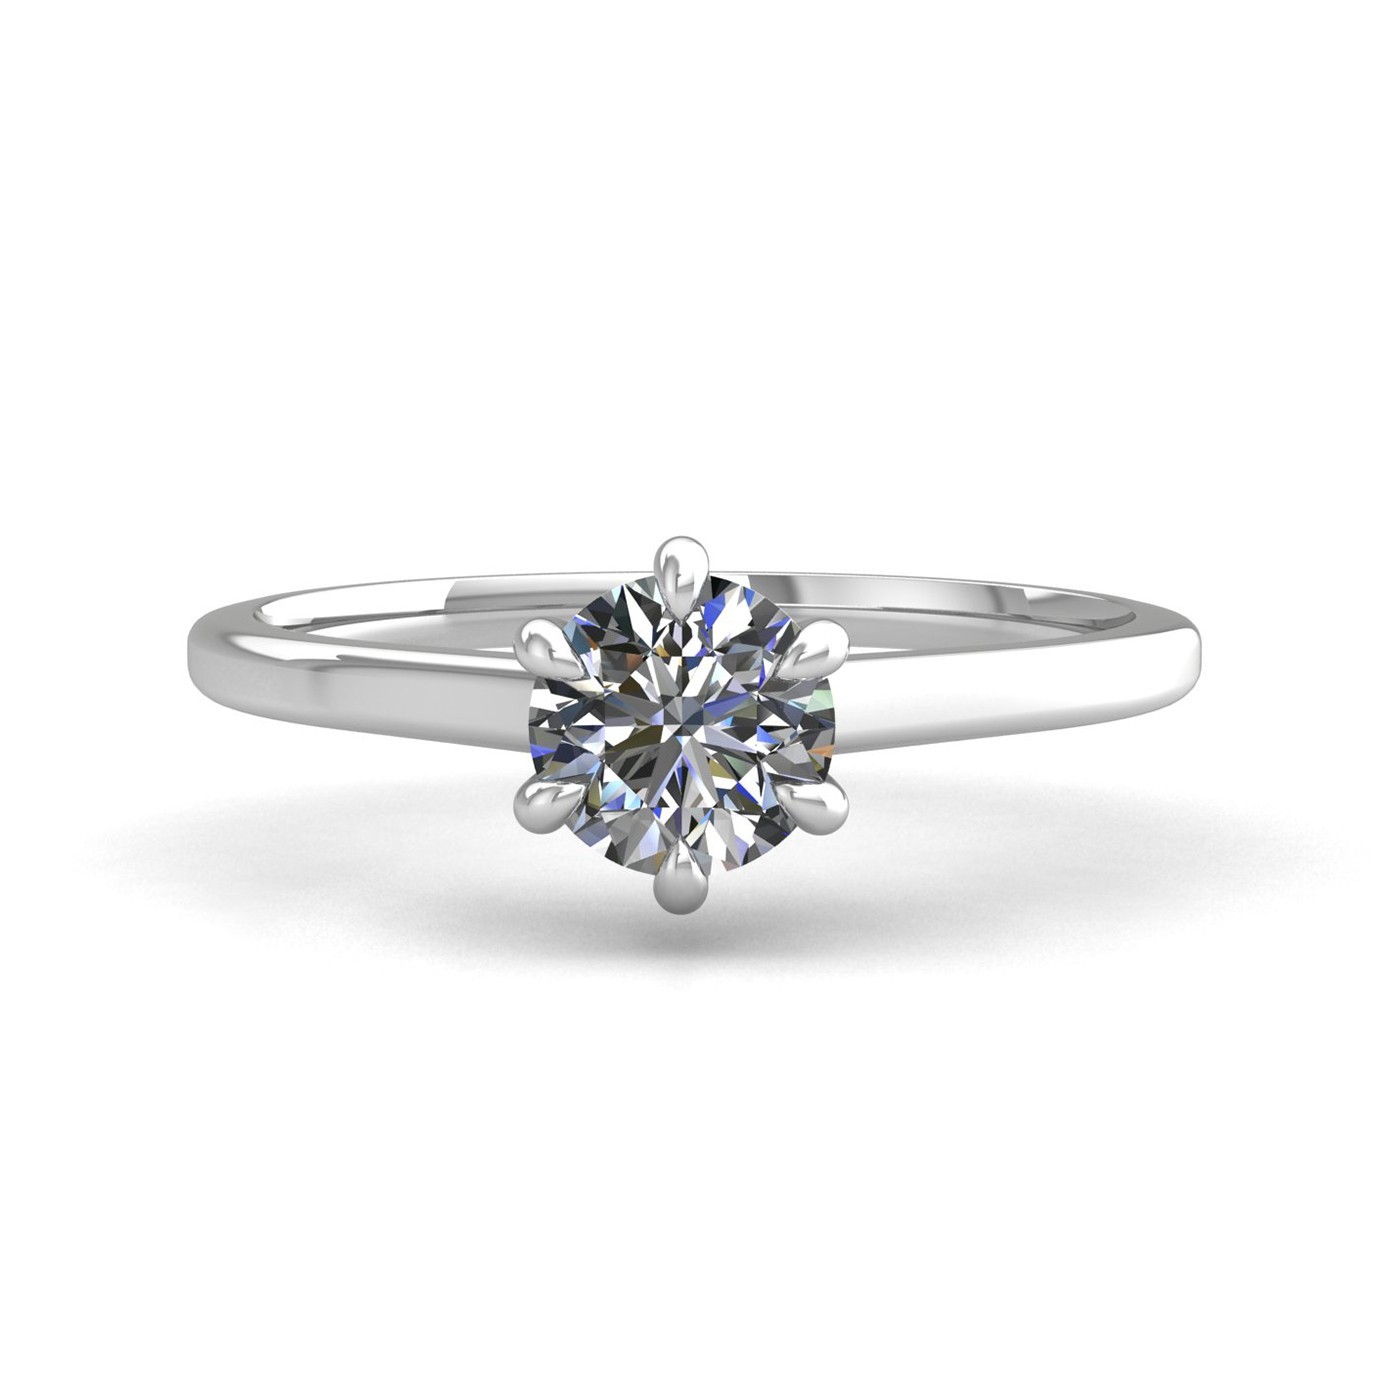 18k white gold 0,80 ct 6 prongs solitaire round cut diamond engagement ring with whisper thin band Photos & images